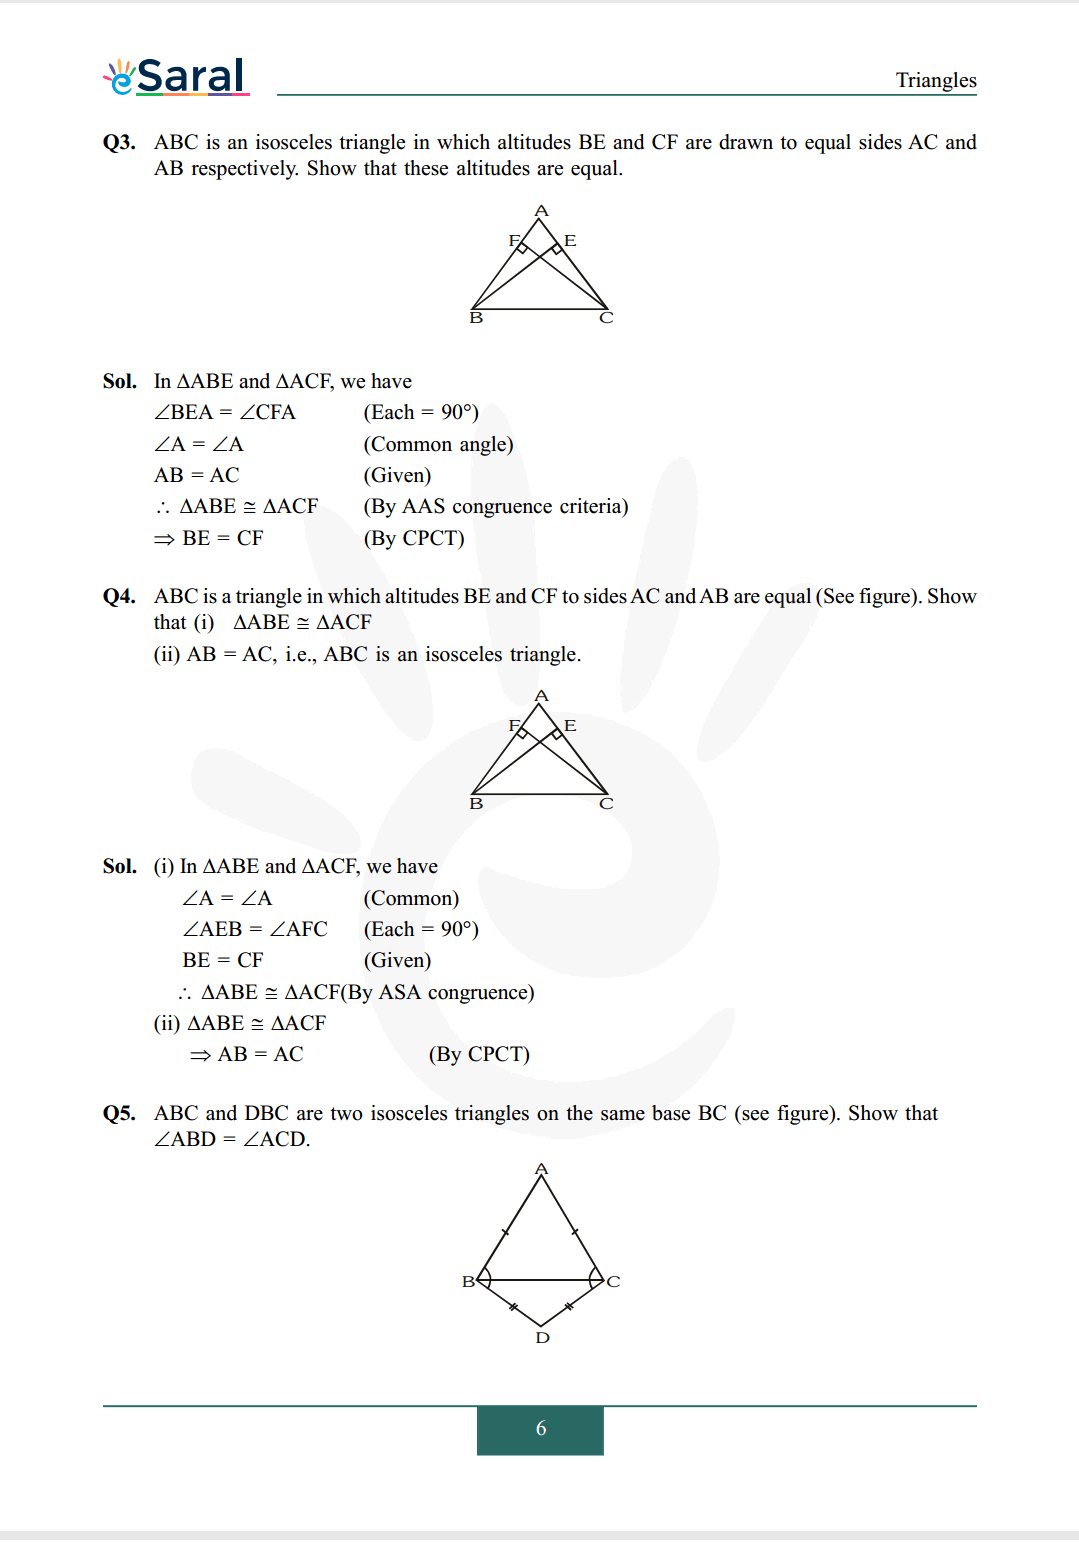 Class 9 maths chapter 7 exercise 7.2 solutions Image 2